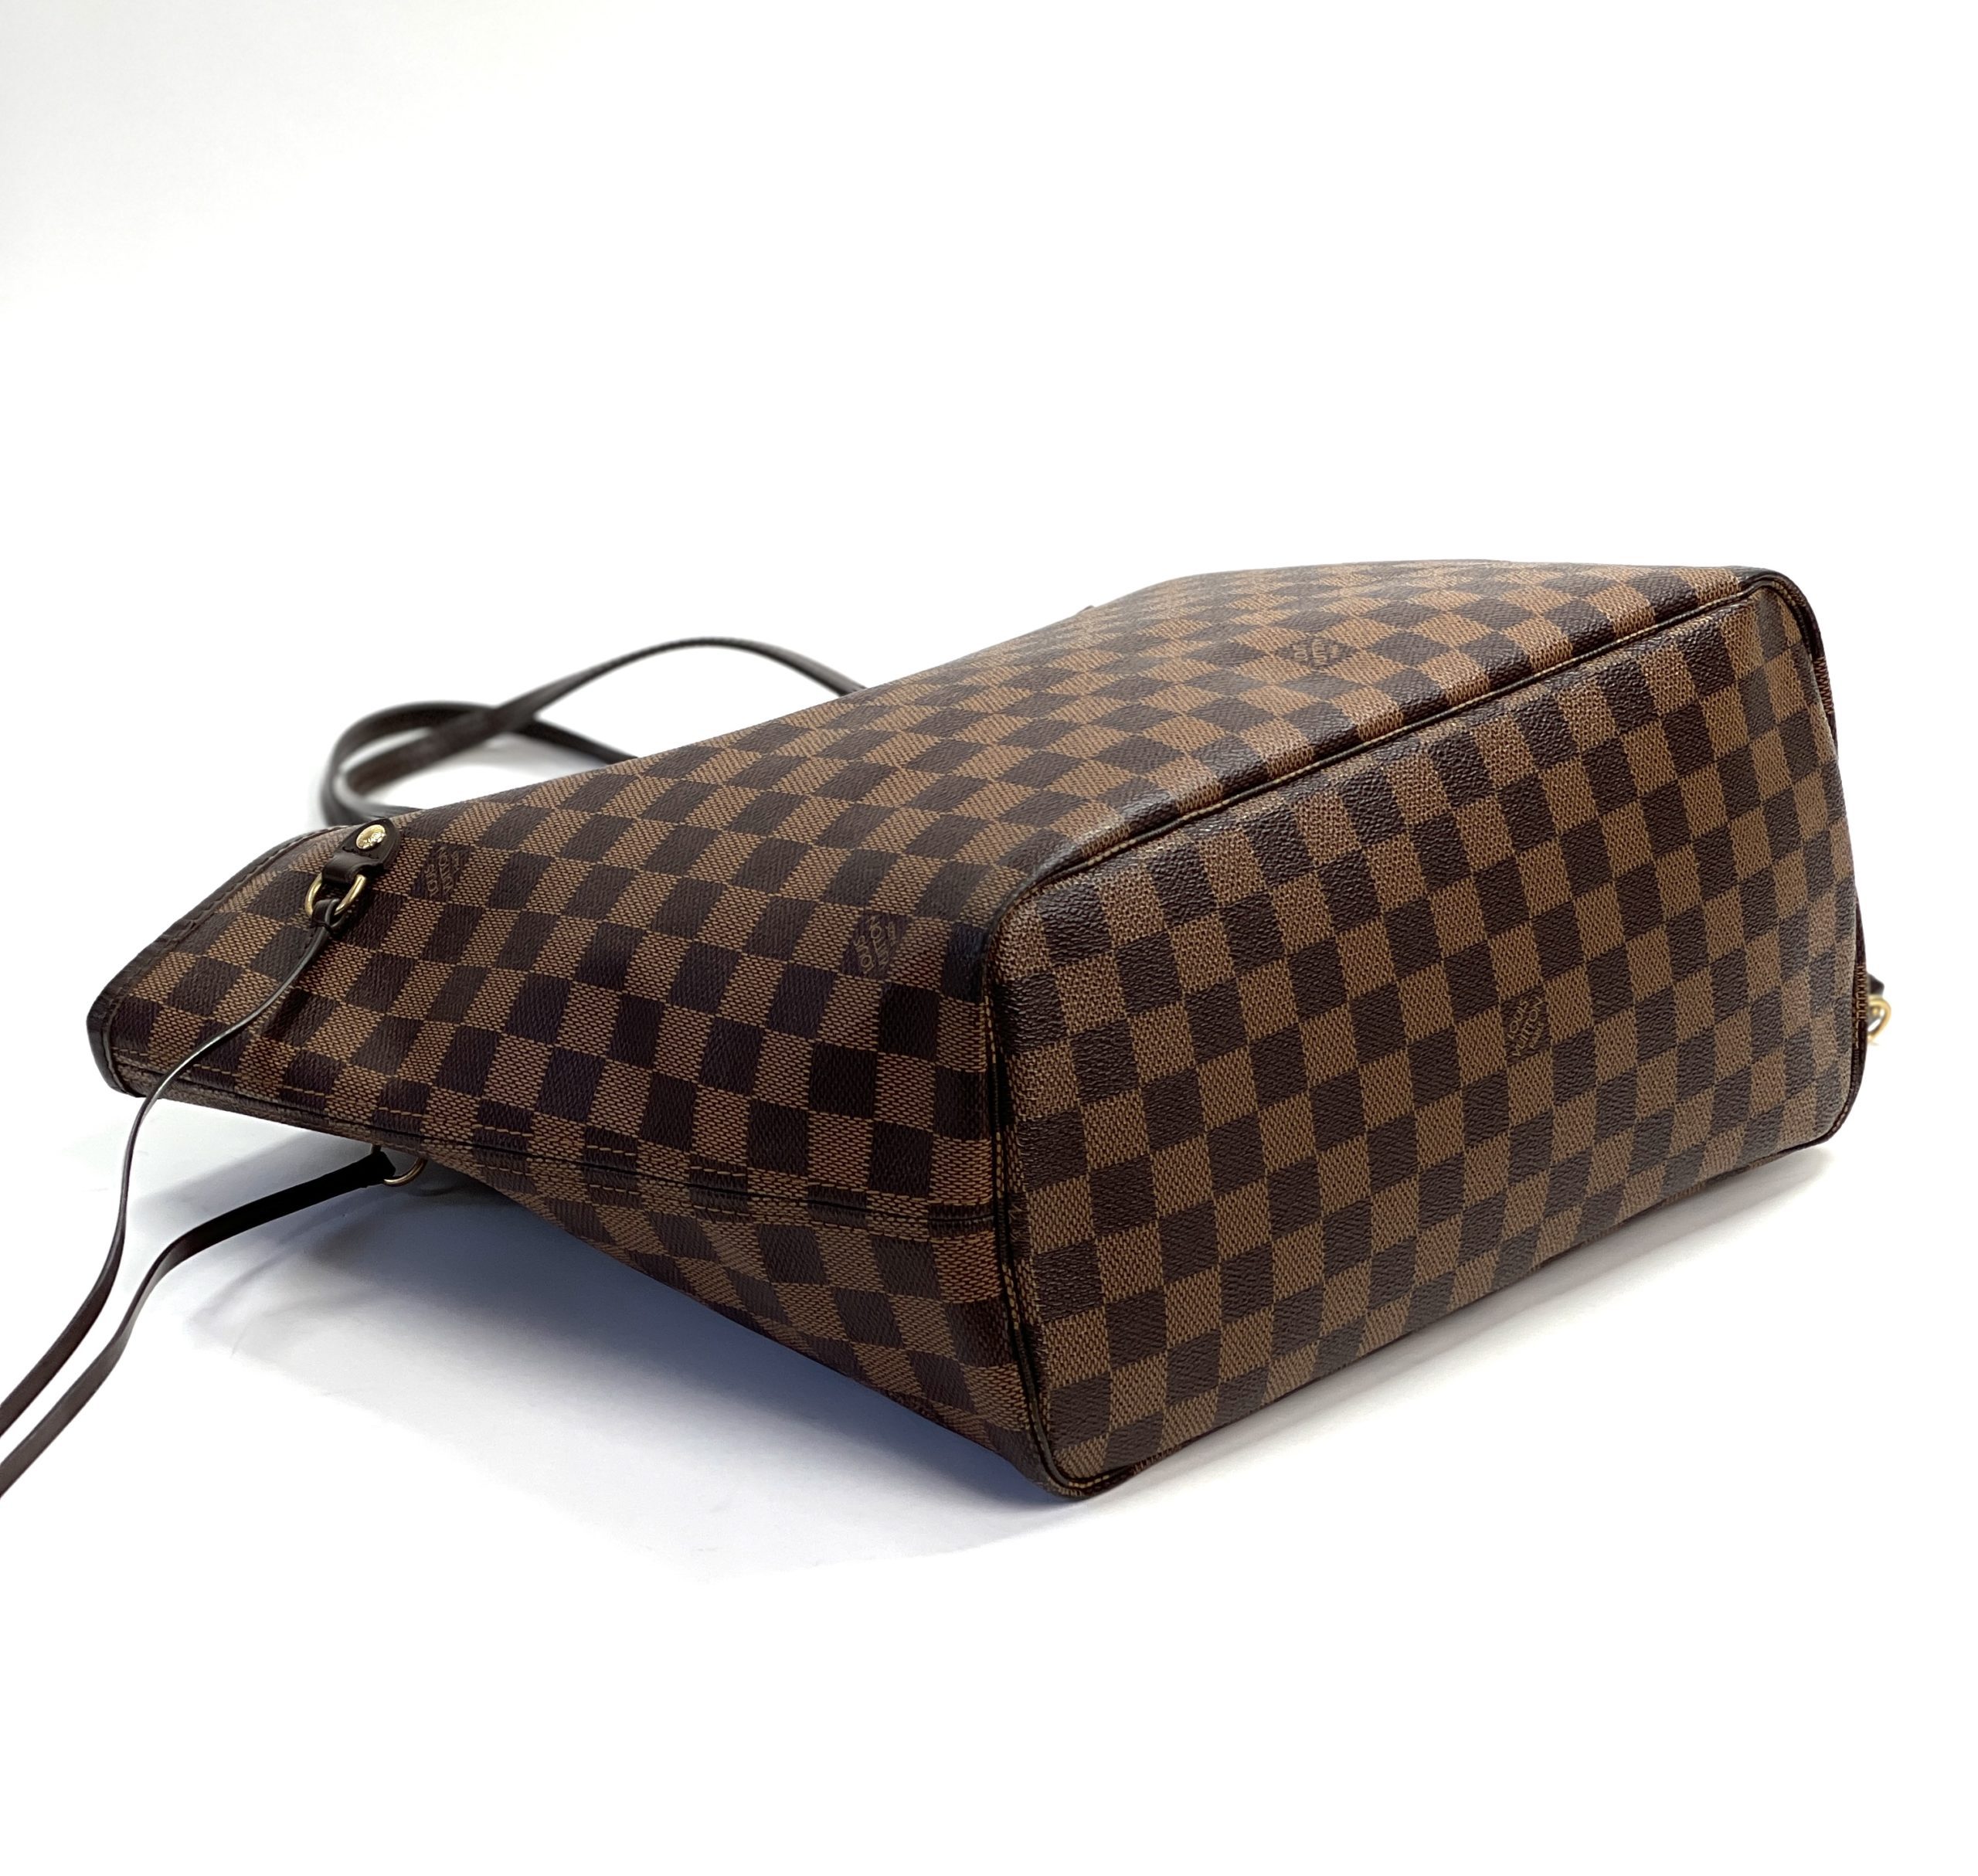 Louis Vuitton Neverfull MM - Damier Ebene With Rose Ballerine  Louis  vuitton handbags neverfull, Louis vuitton handbags, Louis vuitton bag